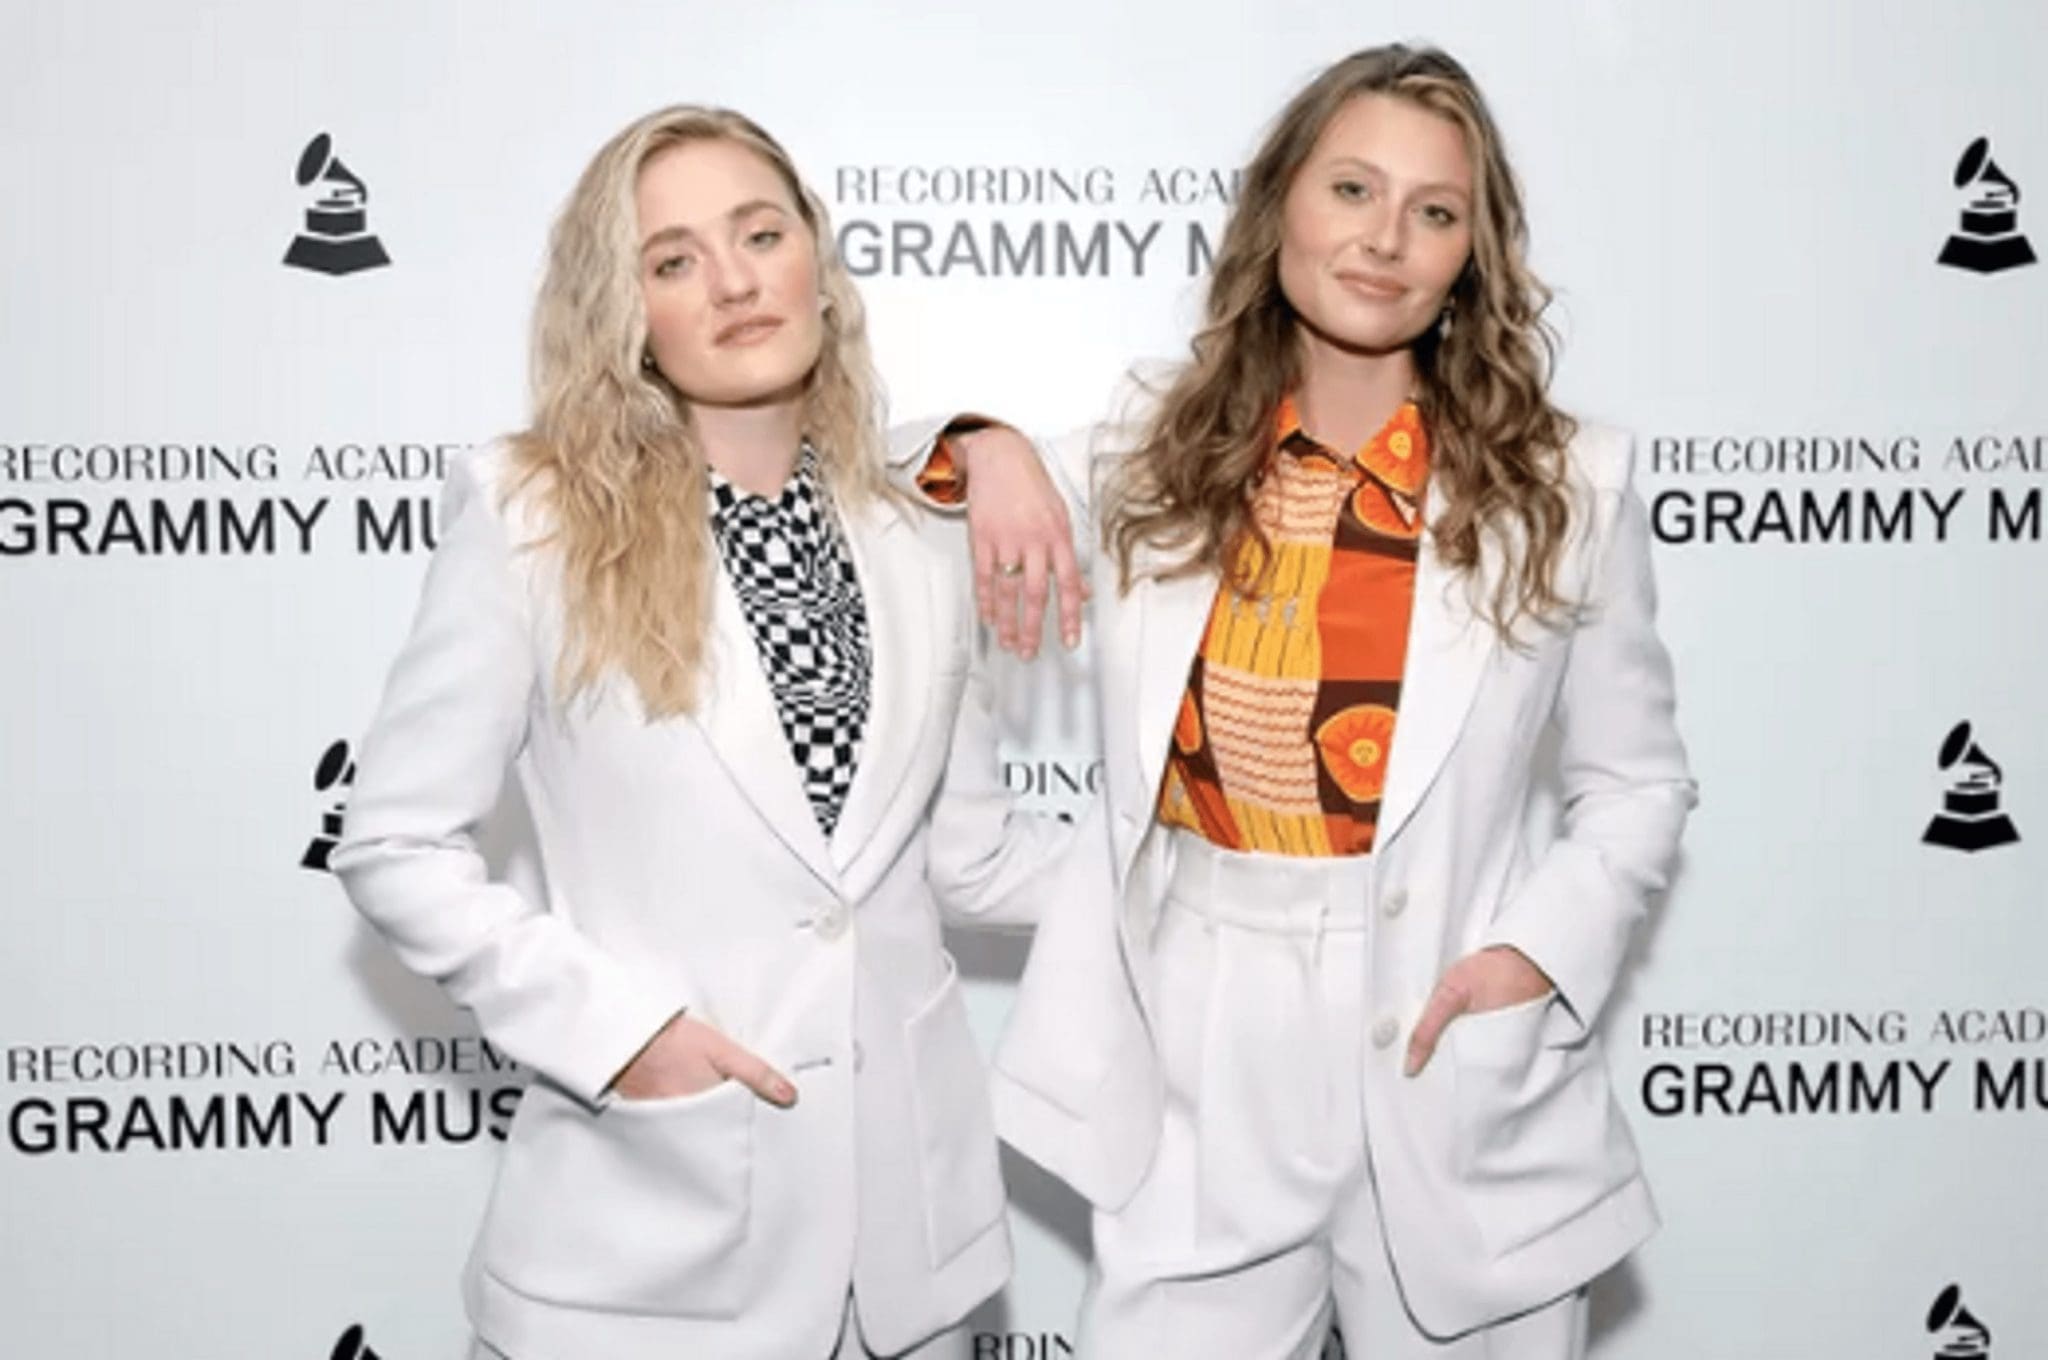 Aly And AJ Michalka Were Almost Given Leading Roles In 'Hannah Montana' According To AJ Michalka